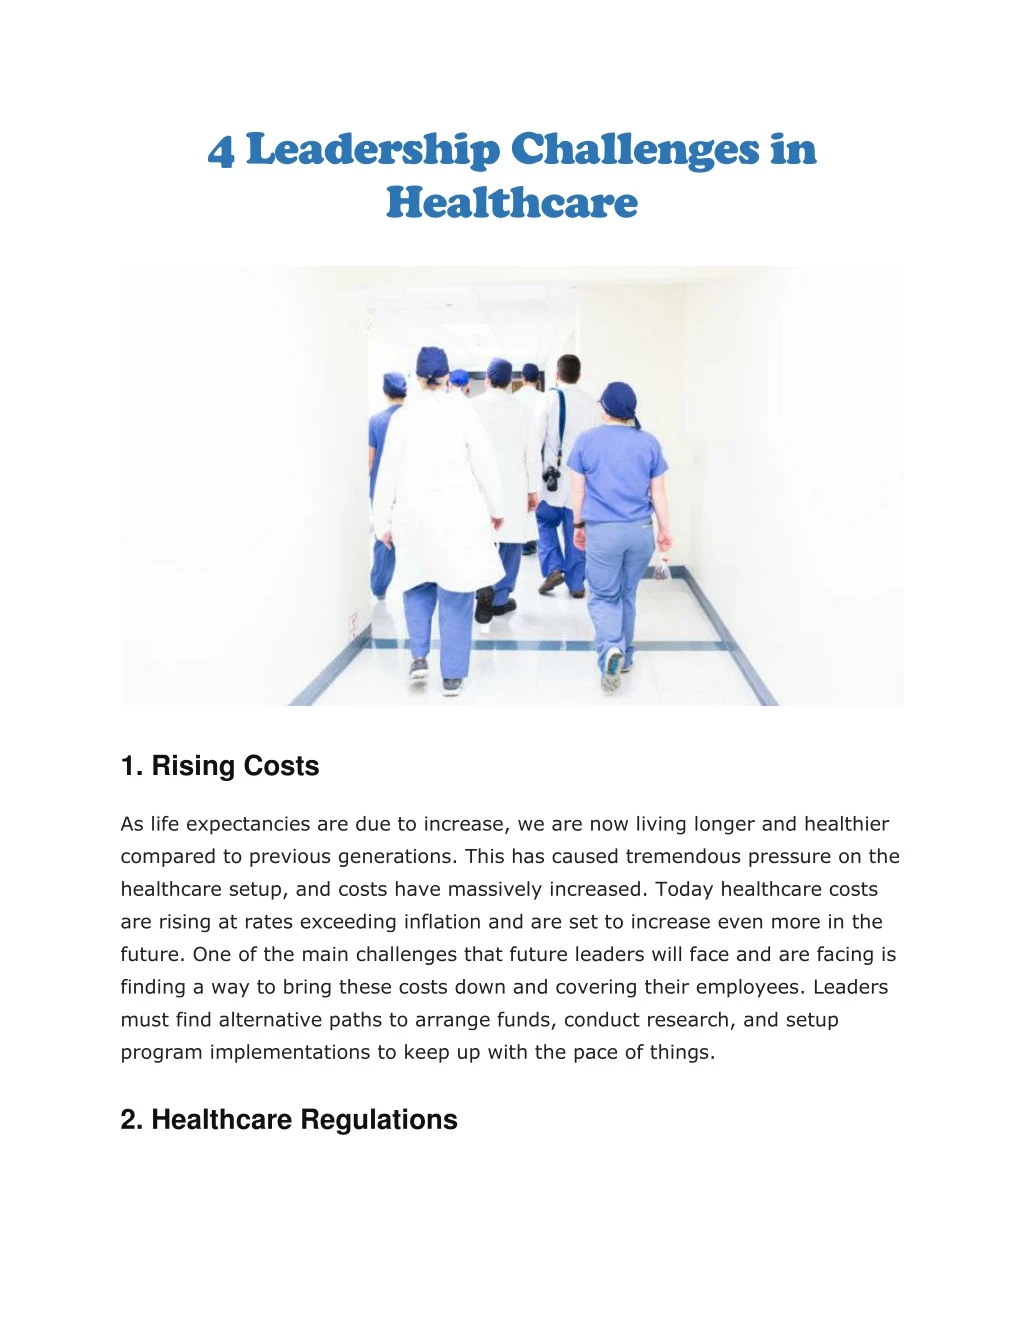 4 leadership challenges in healthcare